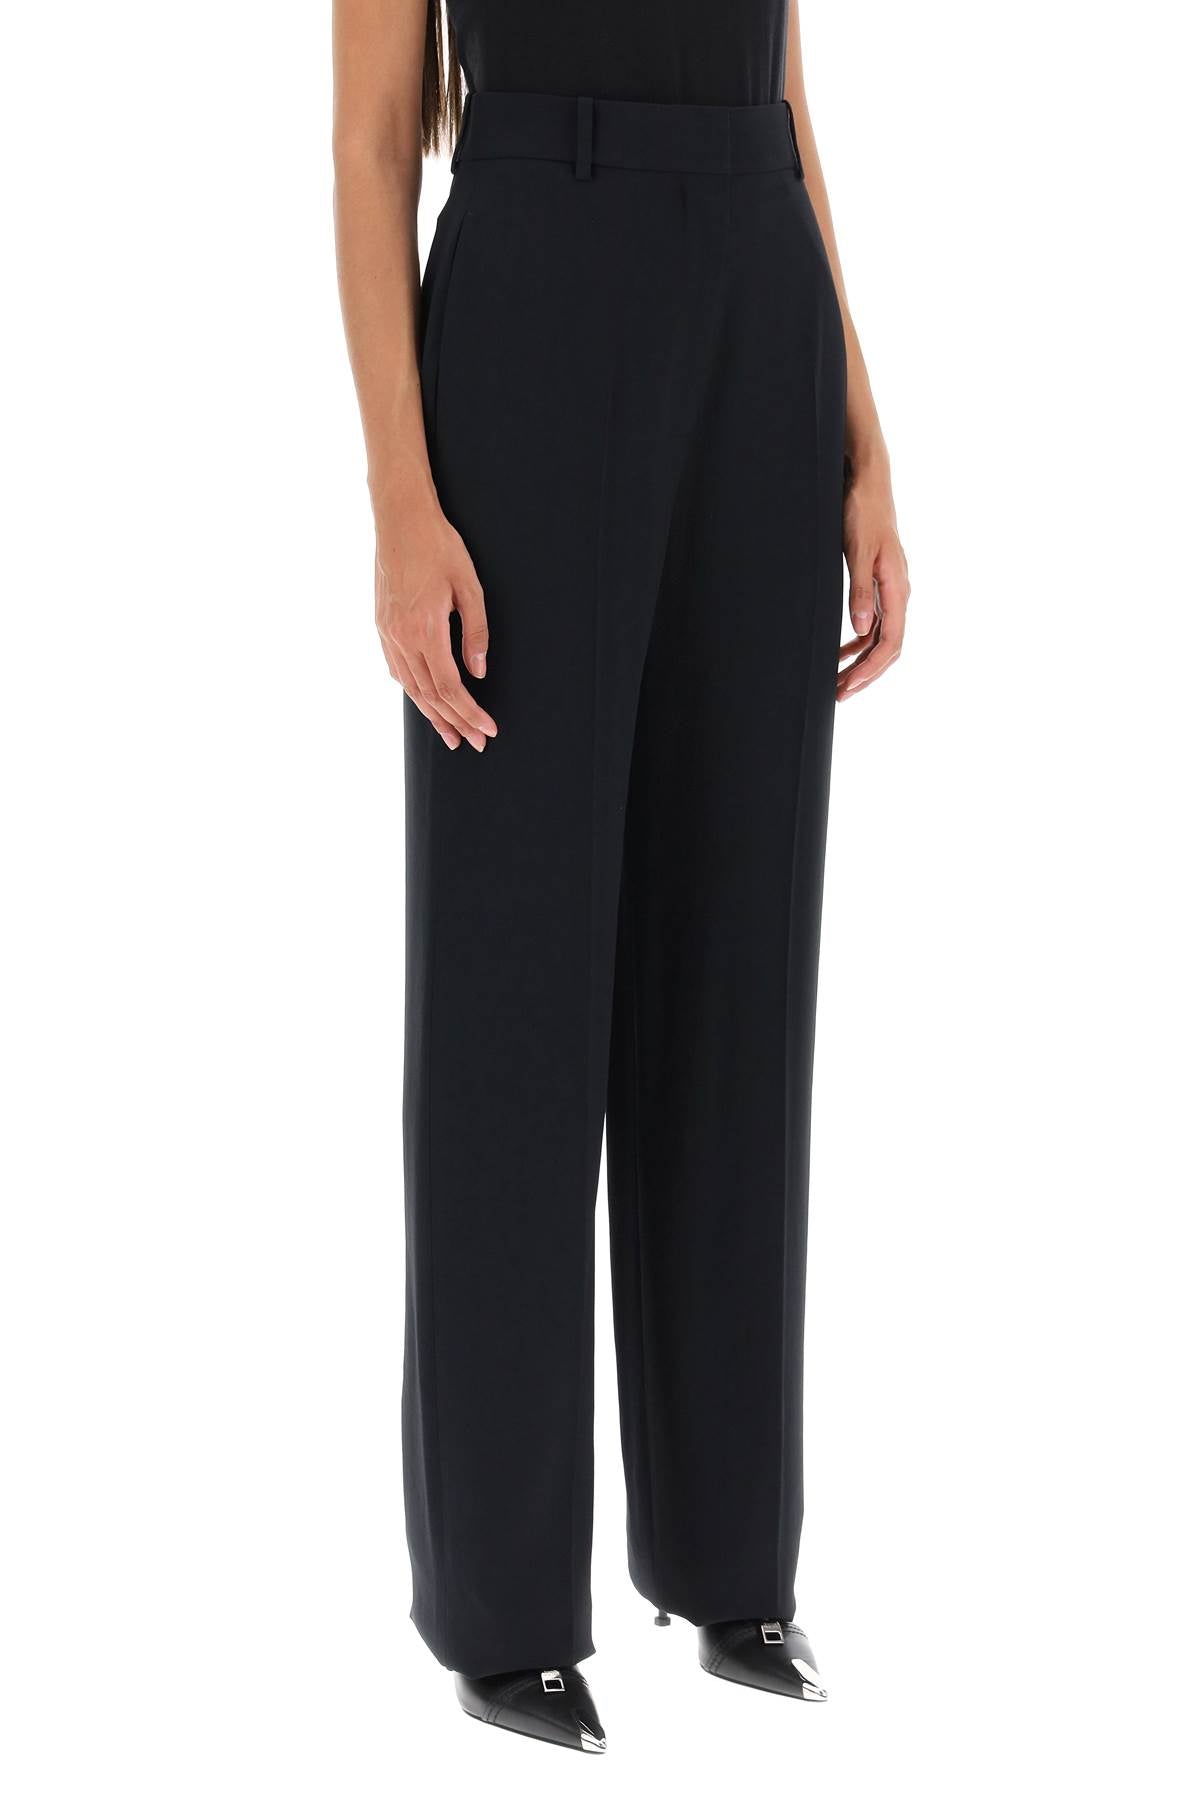 Shop Alexander Mcqueen High-waisted Fluid Crepe Trousers For Women In Black